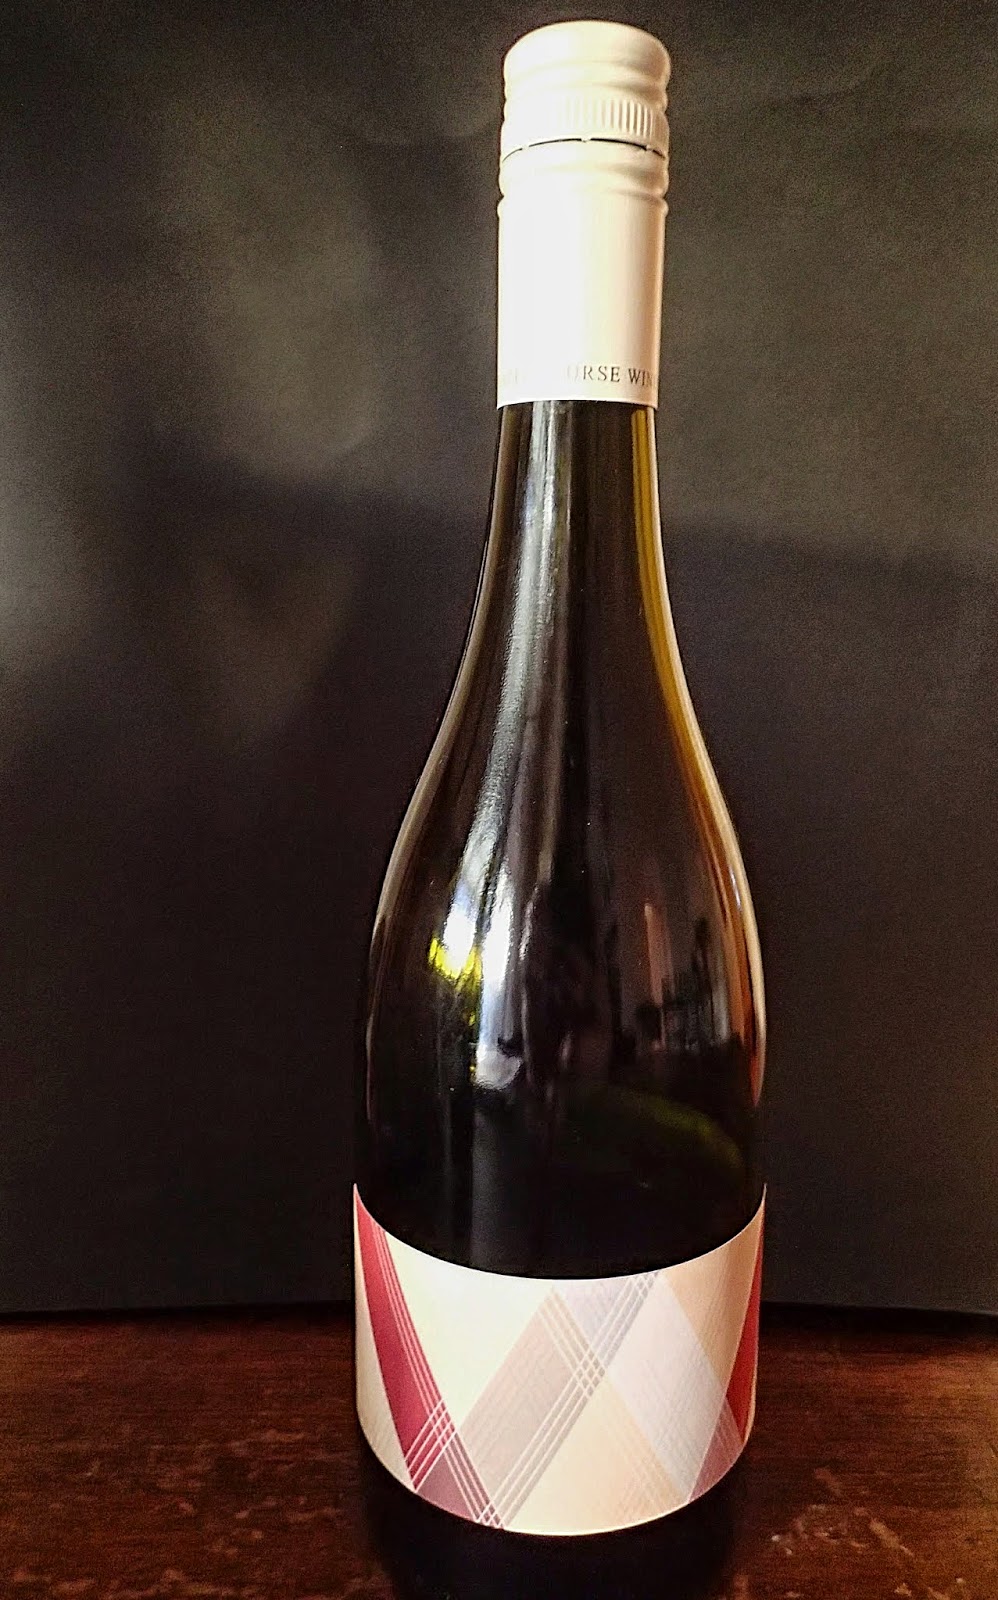 Watercourse Adelaide Hills Pinot Noir 2013 Wine Tasting Review